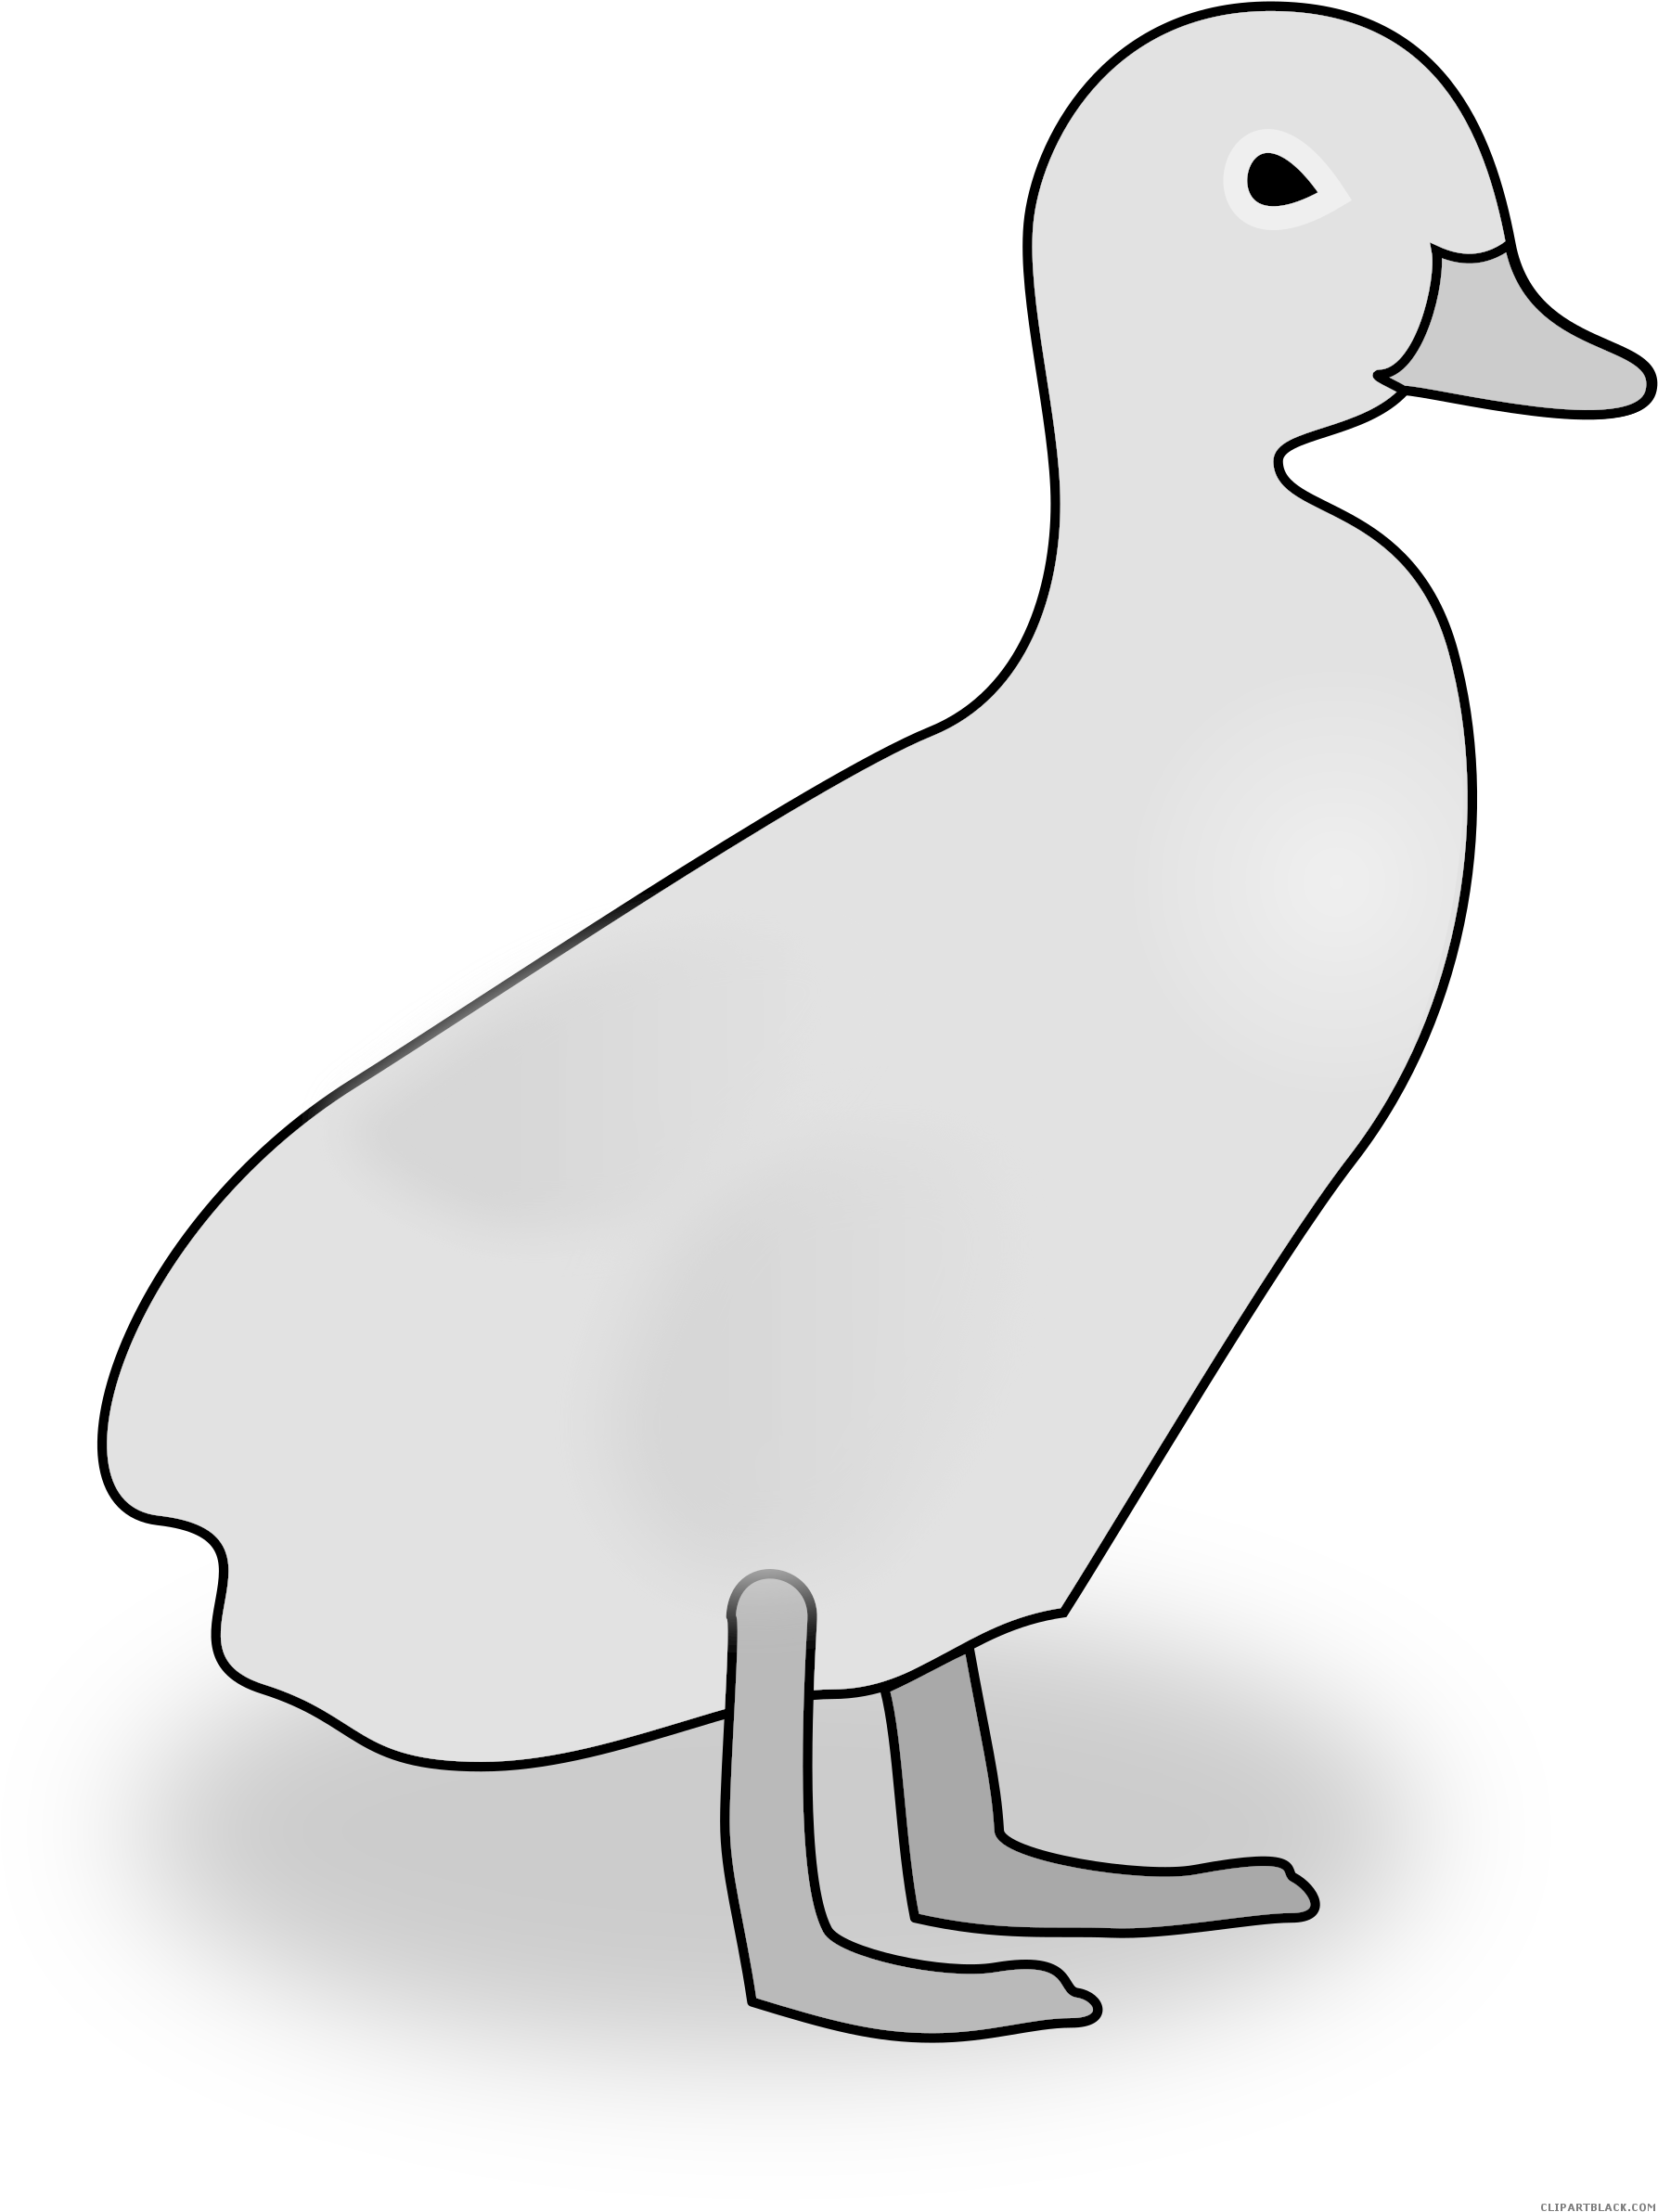 Duckling Black And White Clipart - Clip Art (1827x2400)